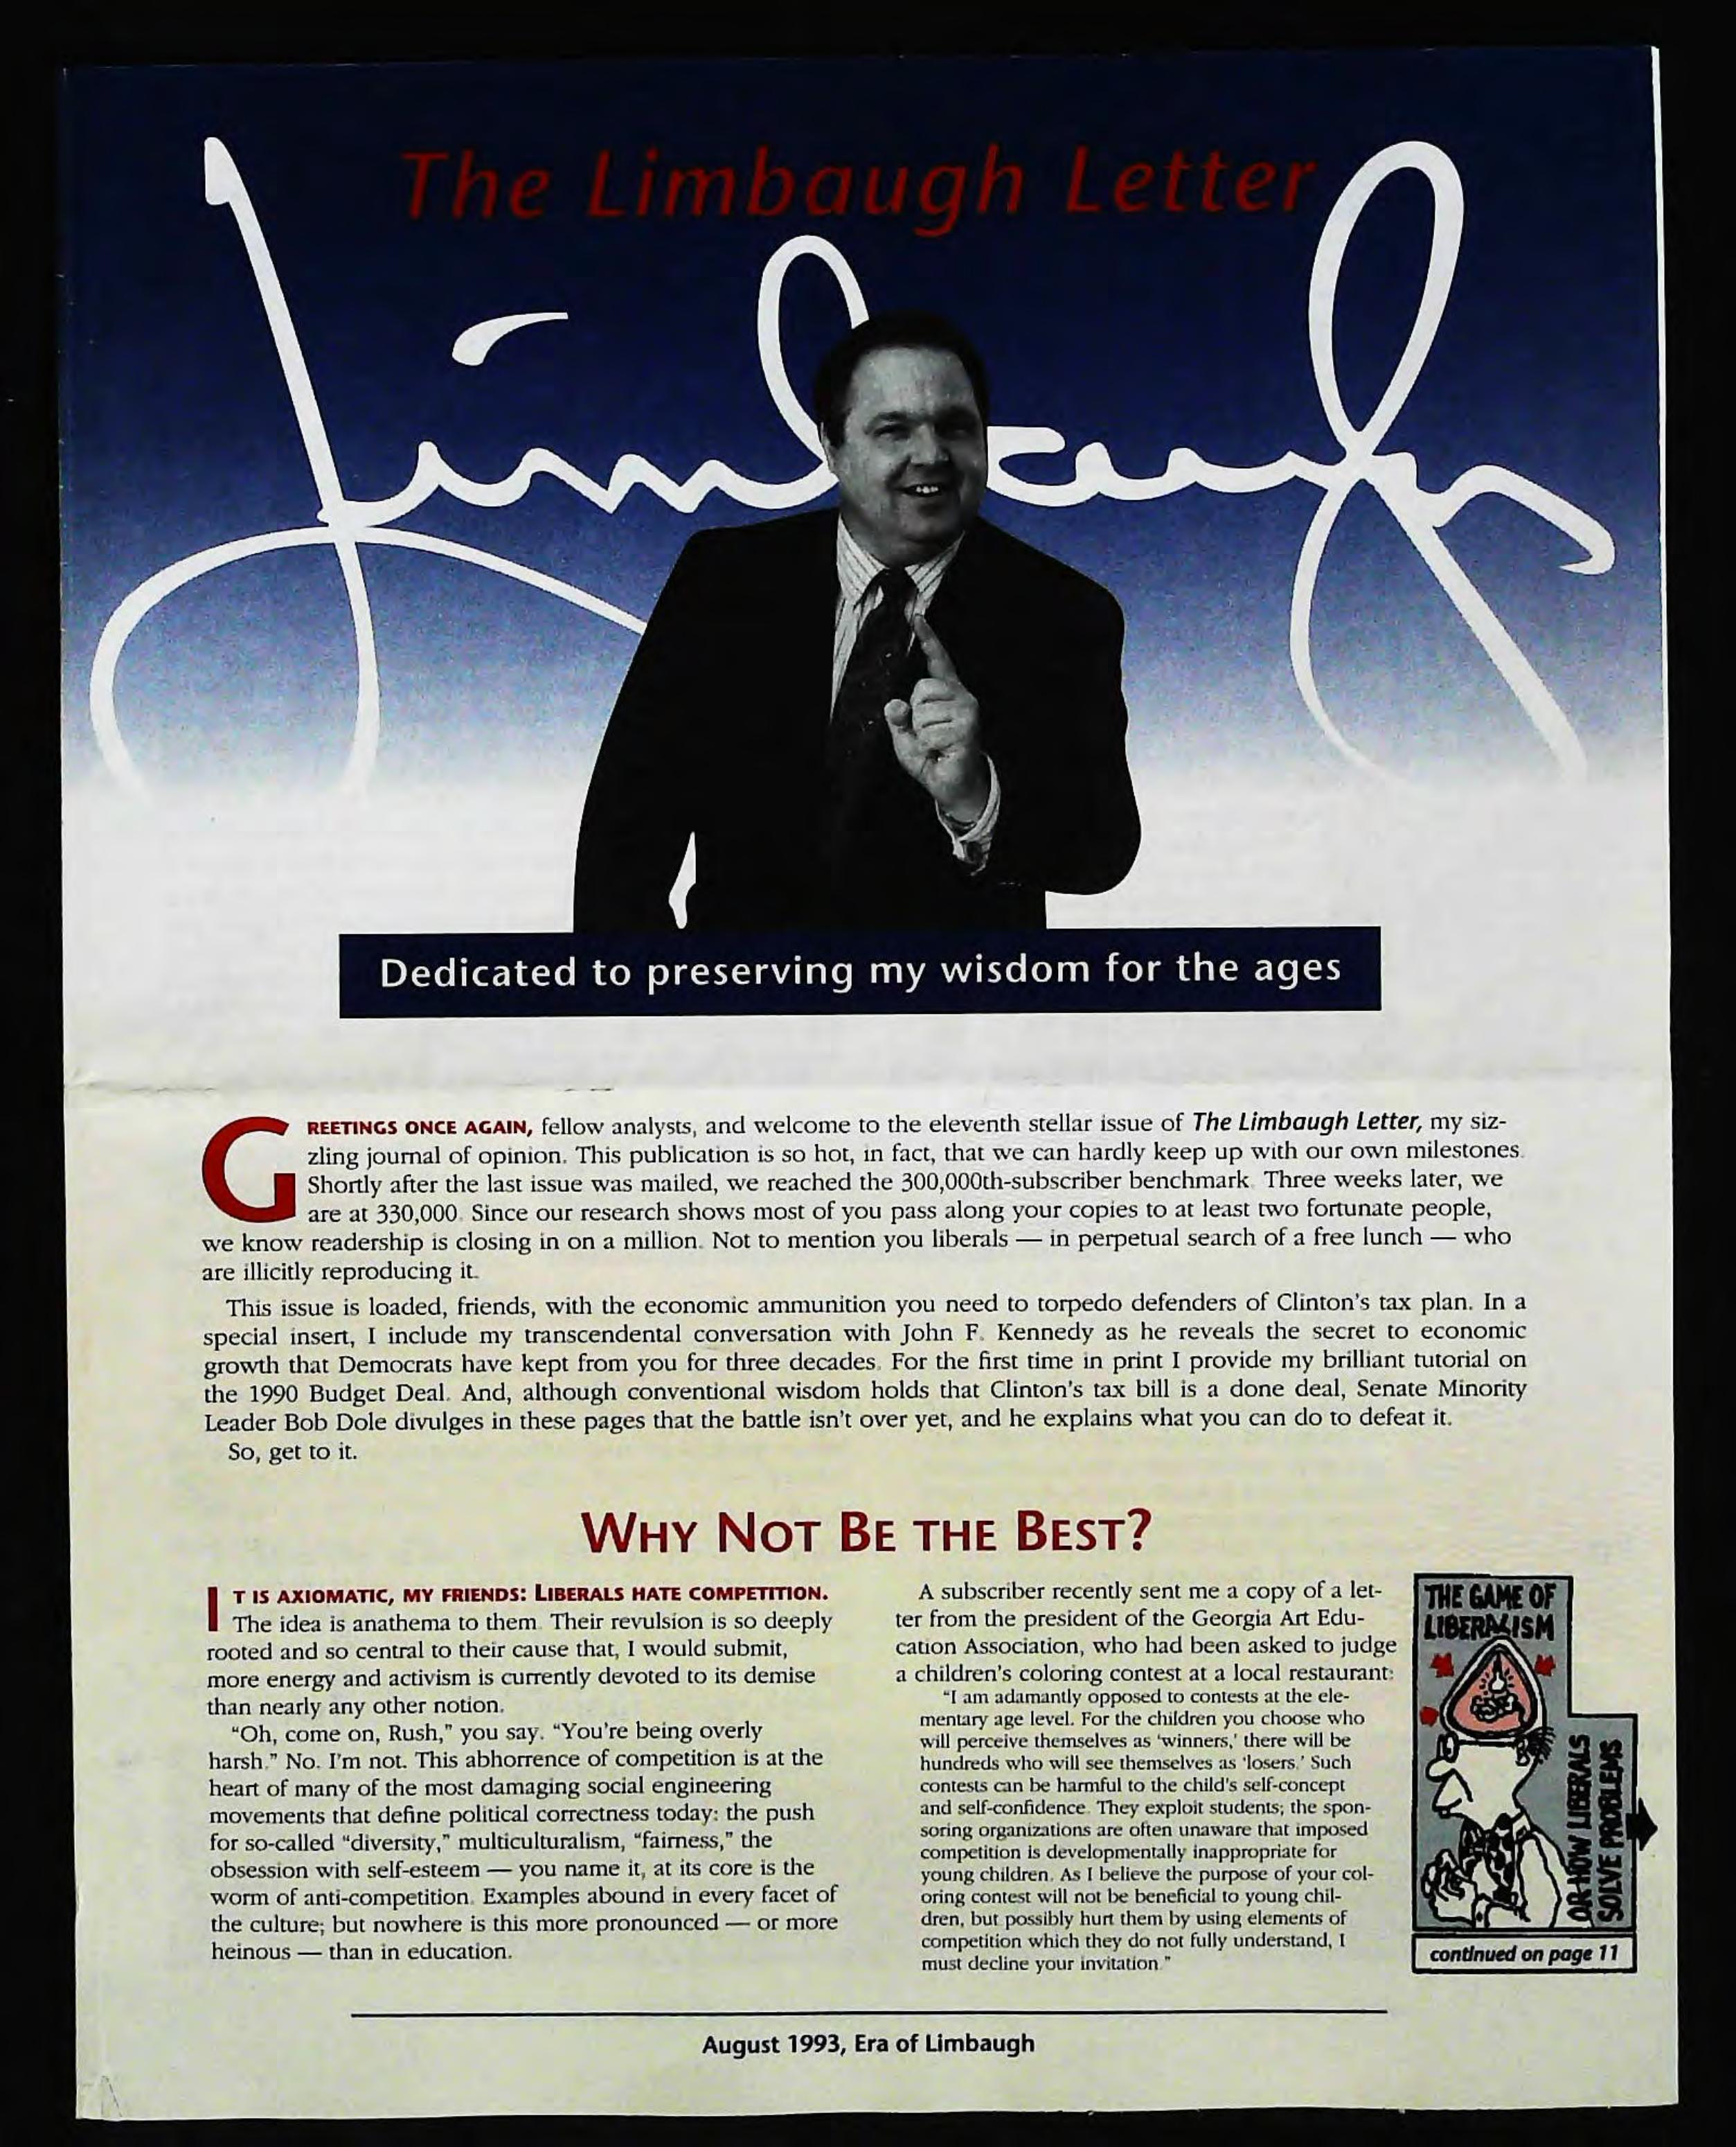 The Limbaugh Letter by (1993-08) red